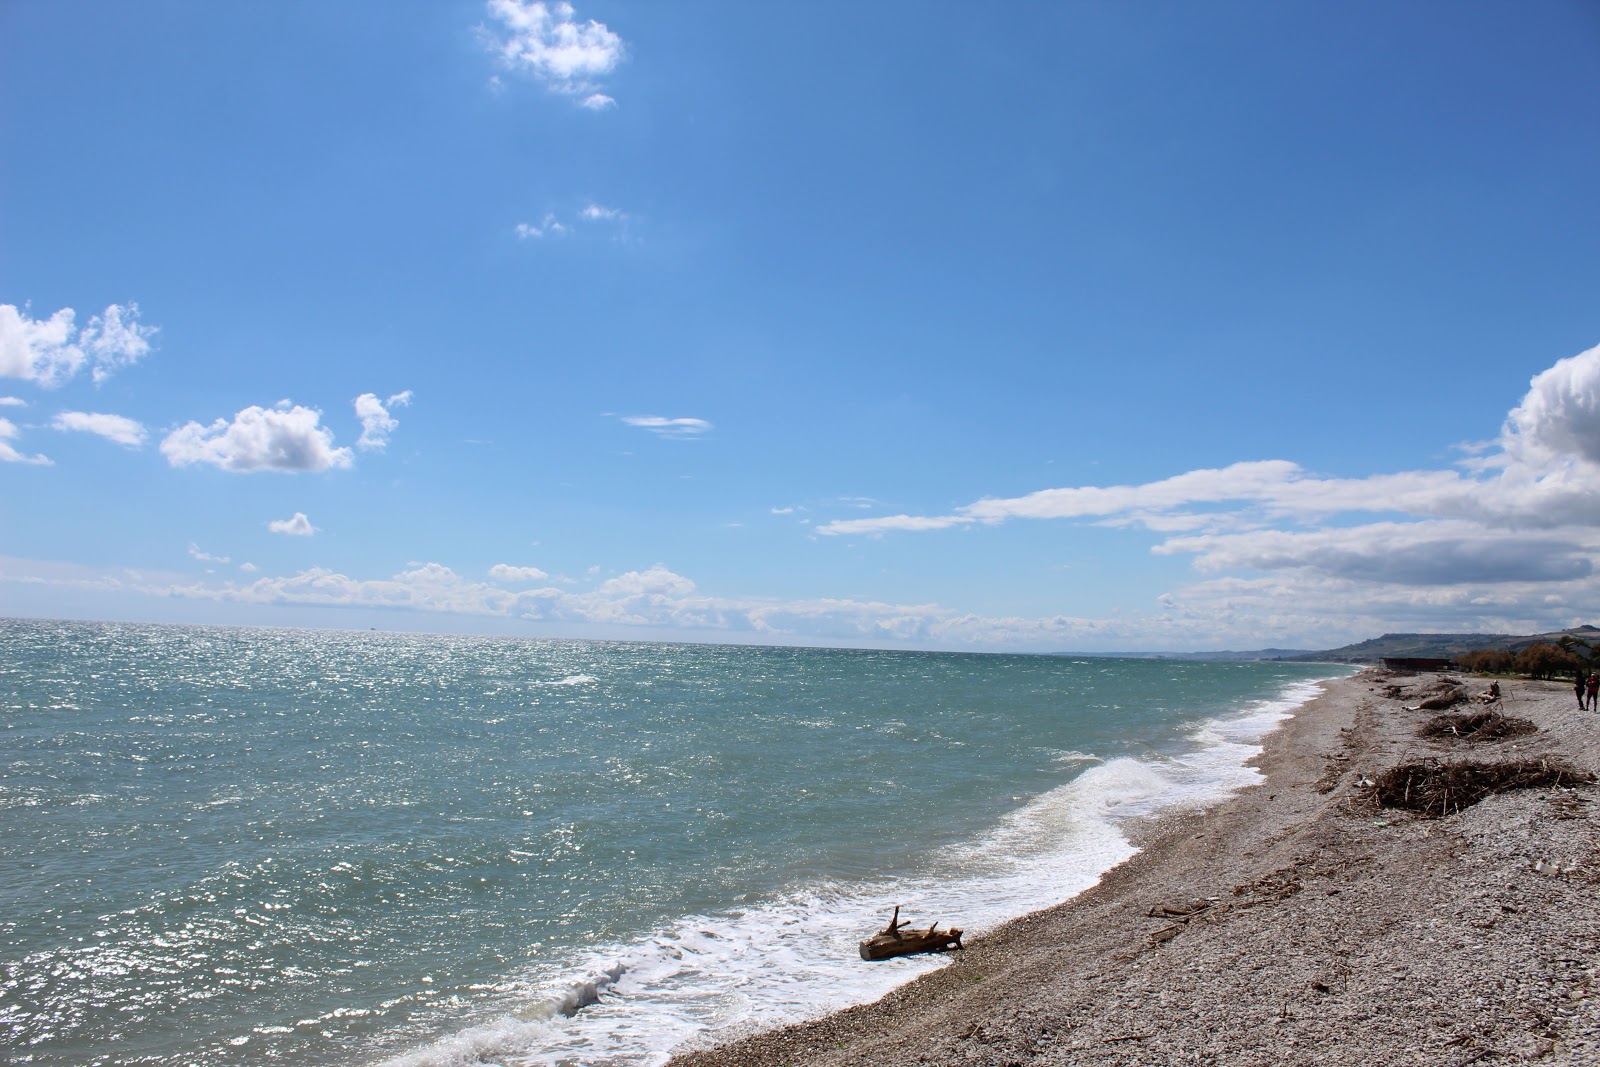 Photo of Spiaggia di Scerne - popular place among relax connoisseurs